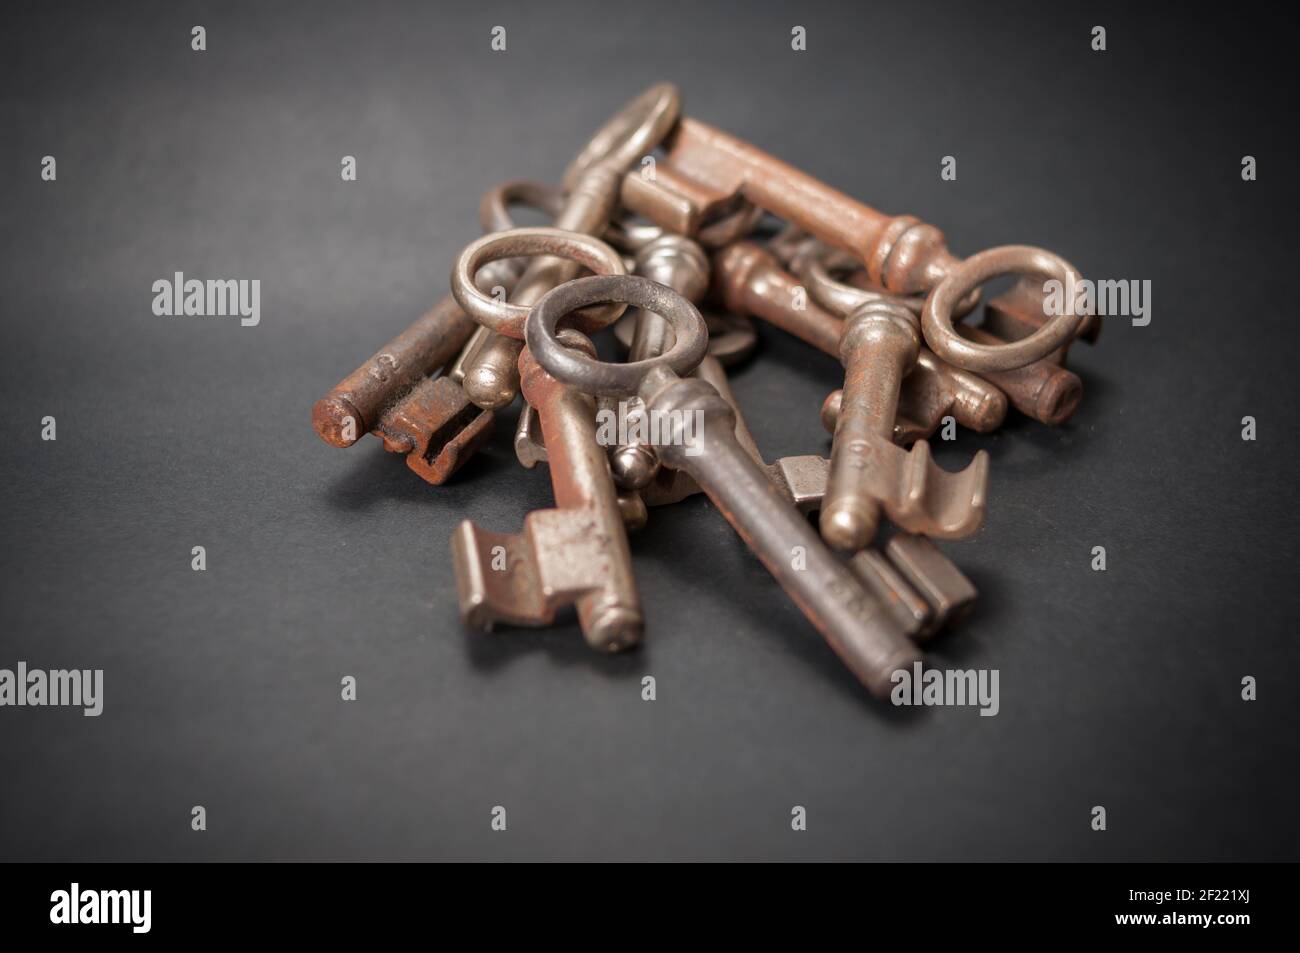 Piled up old tumbler keys They are rusty in different ways and lie on a black background Stock Photo